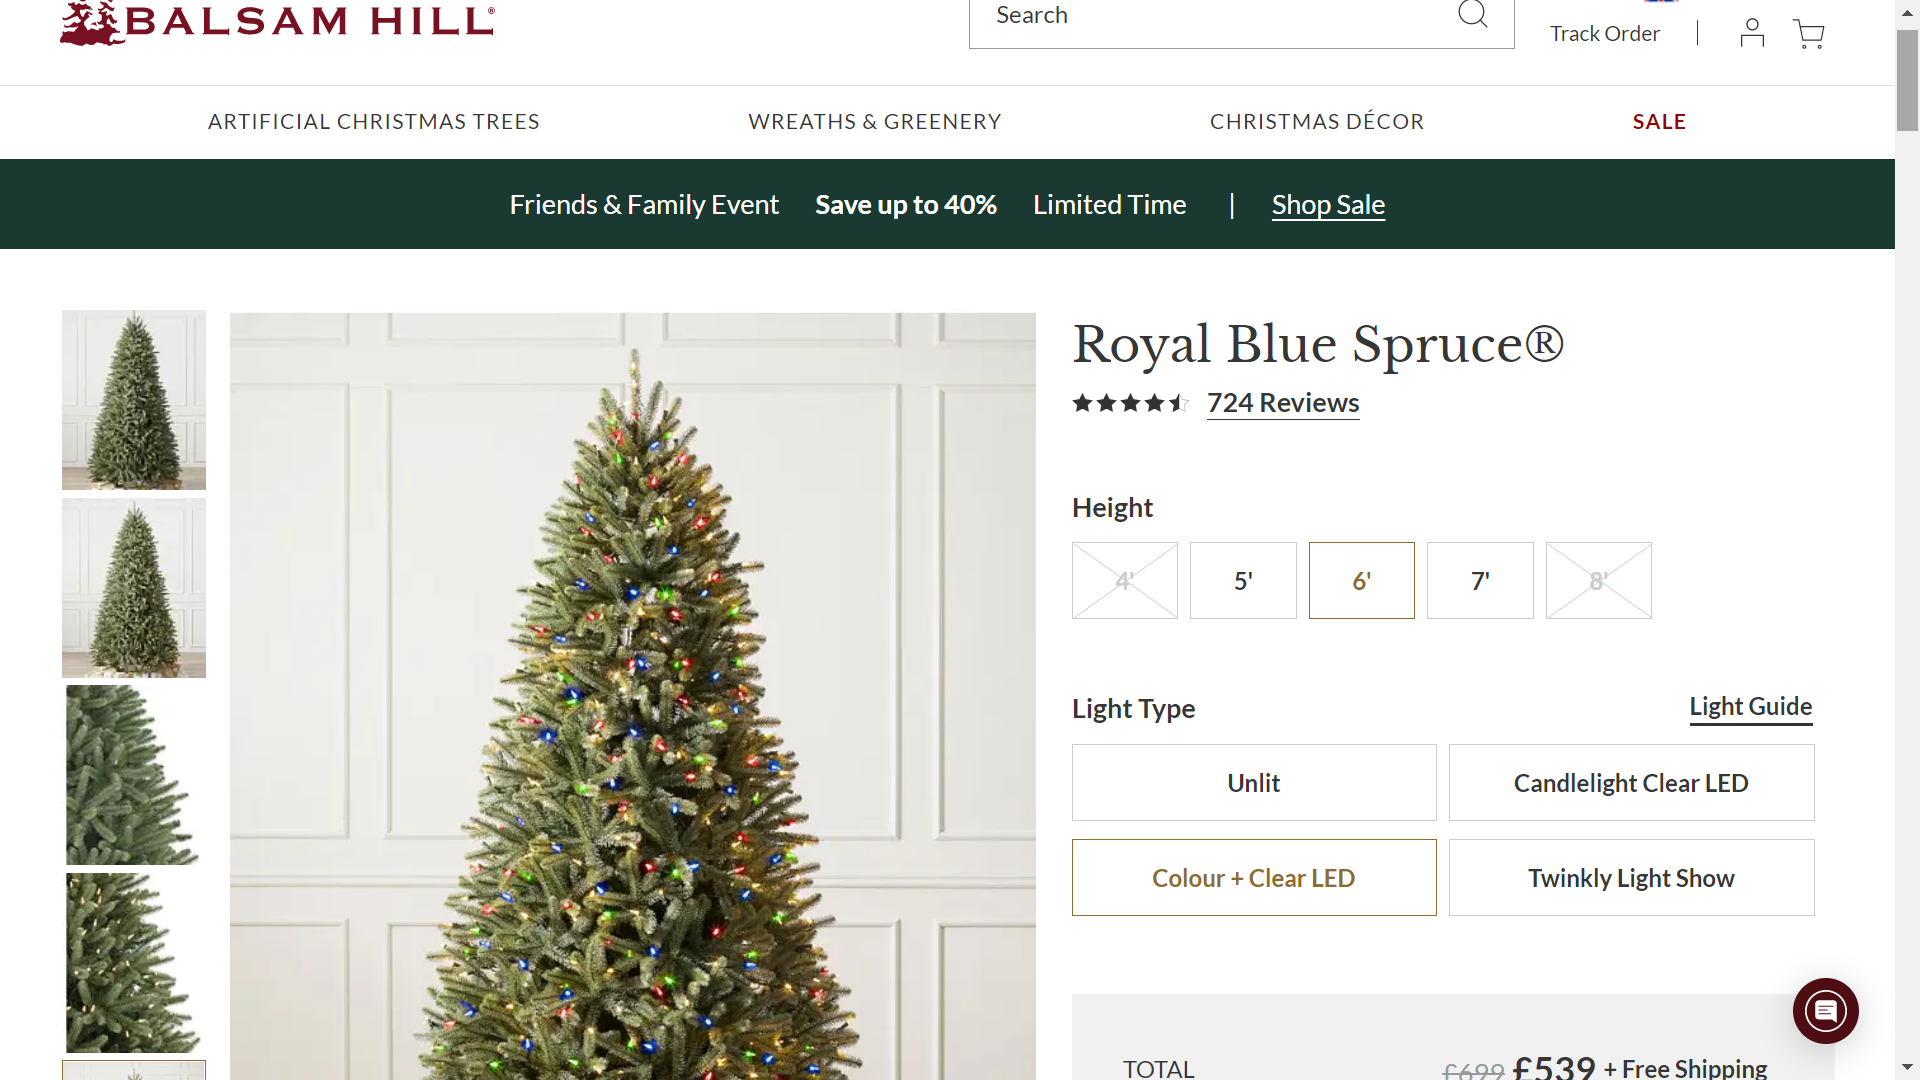 BH (The worlds leading Christmas Tree Brand) Royal Blue Spruce® 6' with LED Colour + Clear Lights - Image 2 of 2